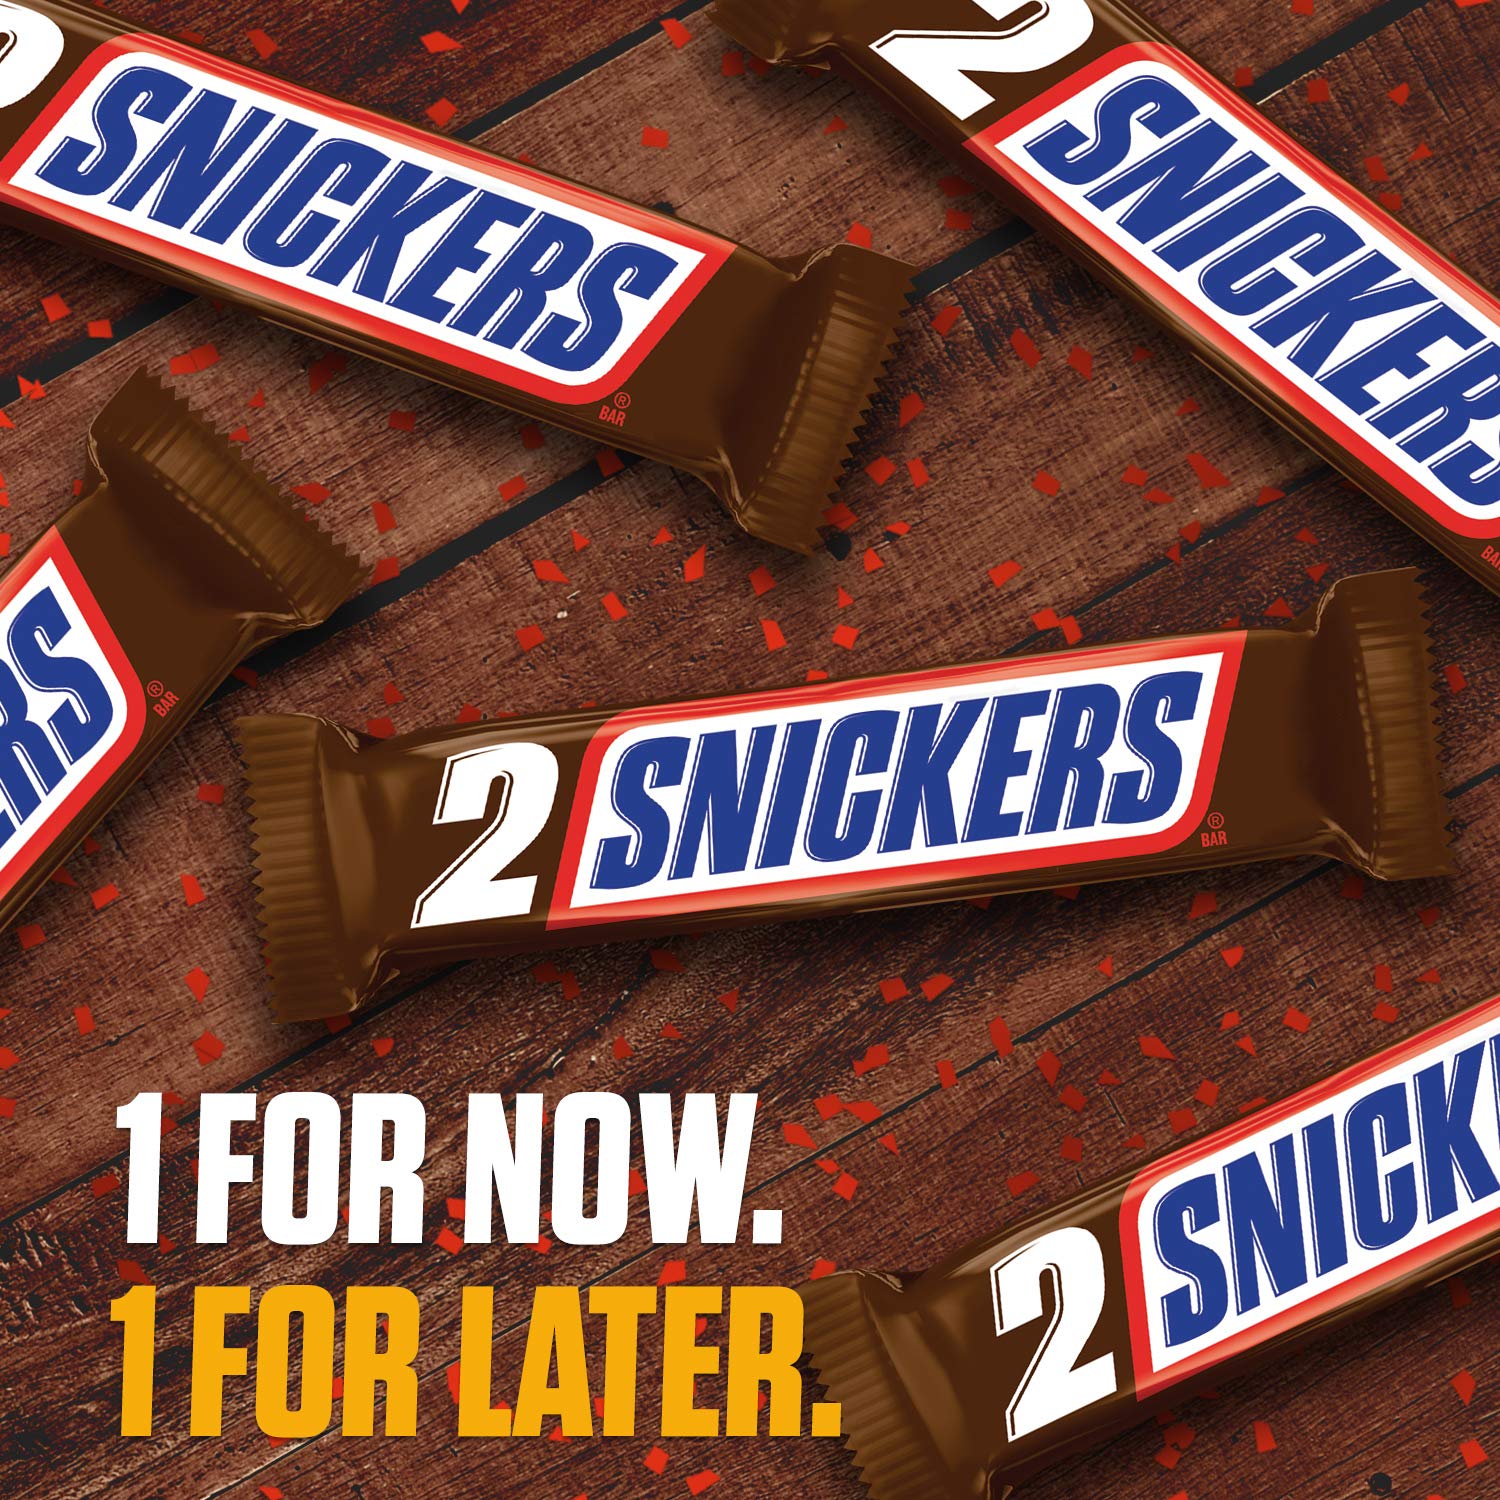  SNICKERS Sharing Size Chocolate Candy Bars 3.29-Ounce Bar 24-Count Box